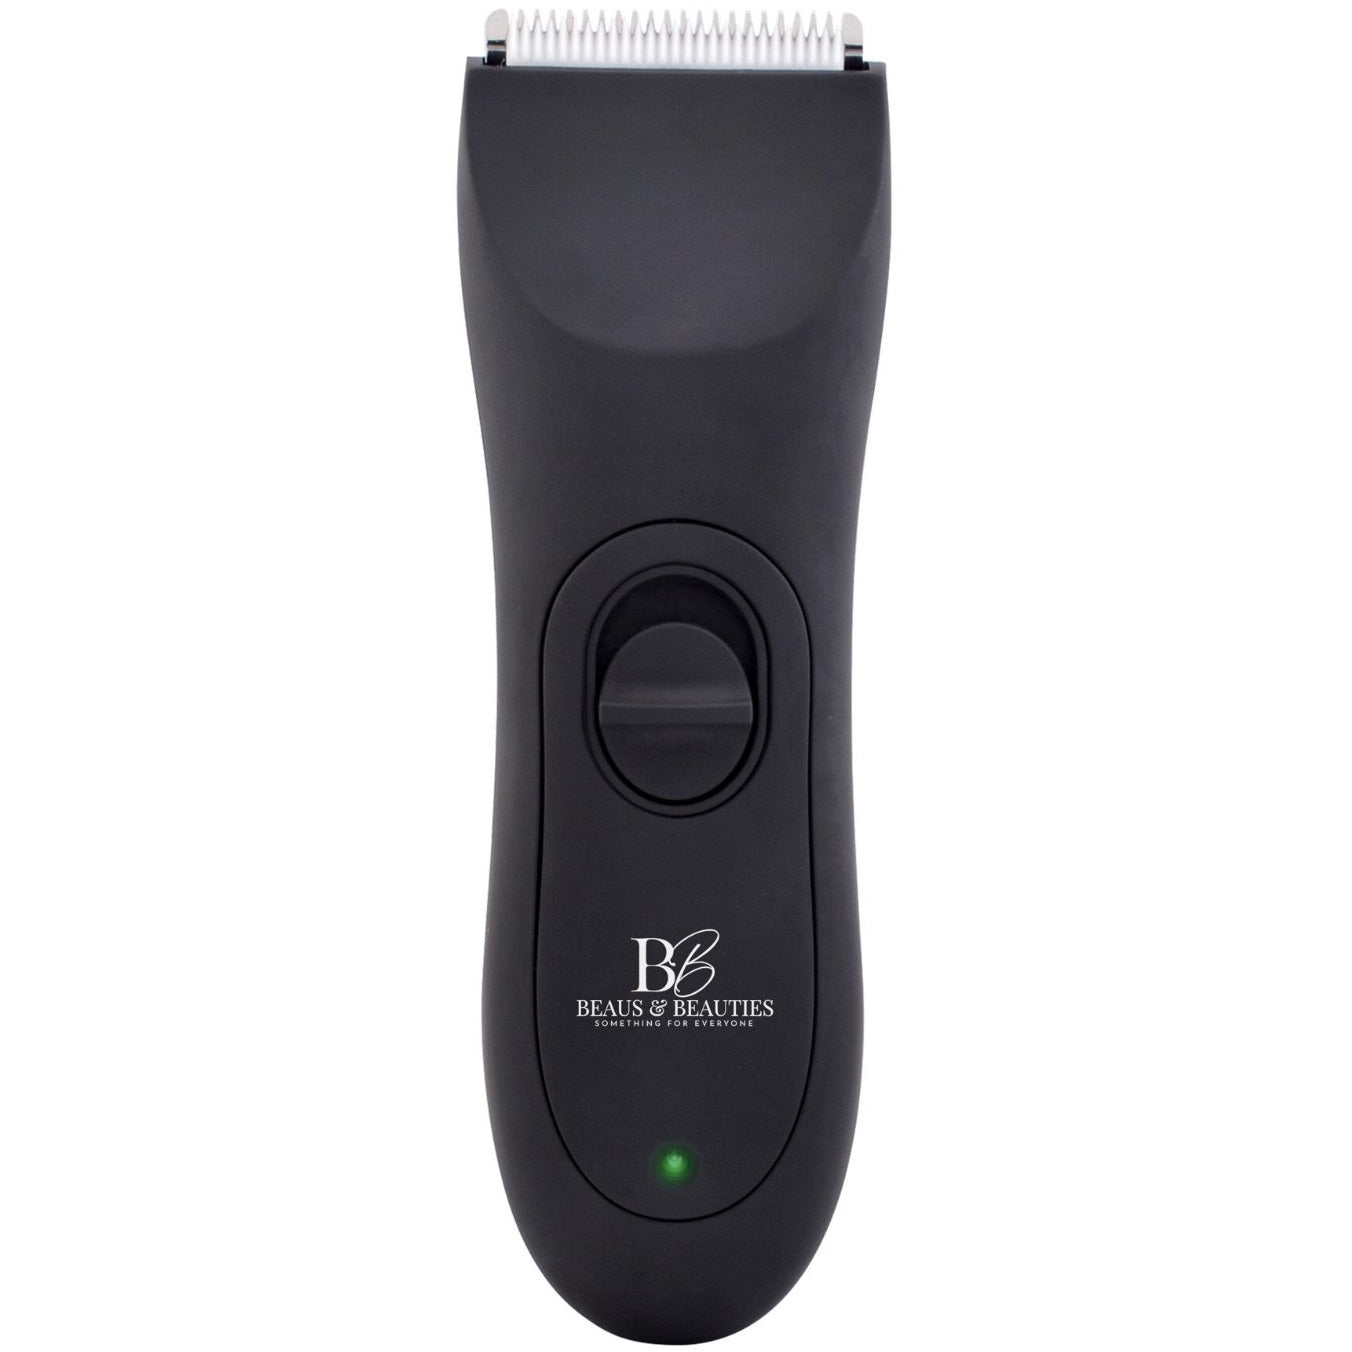 The Beaus Body Hair Trimmer by Beaus and Beauties